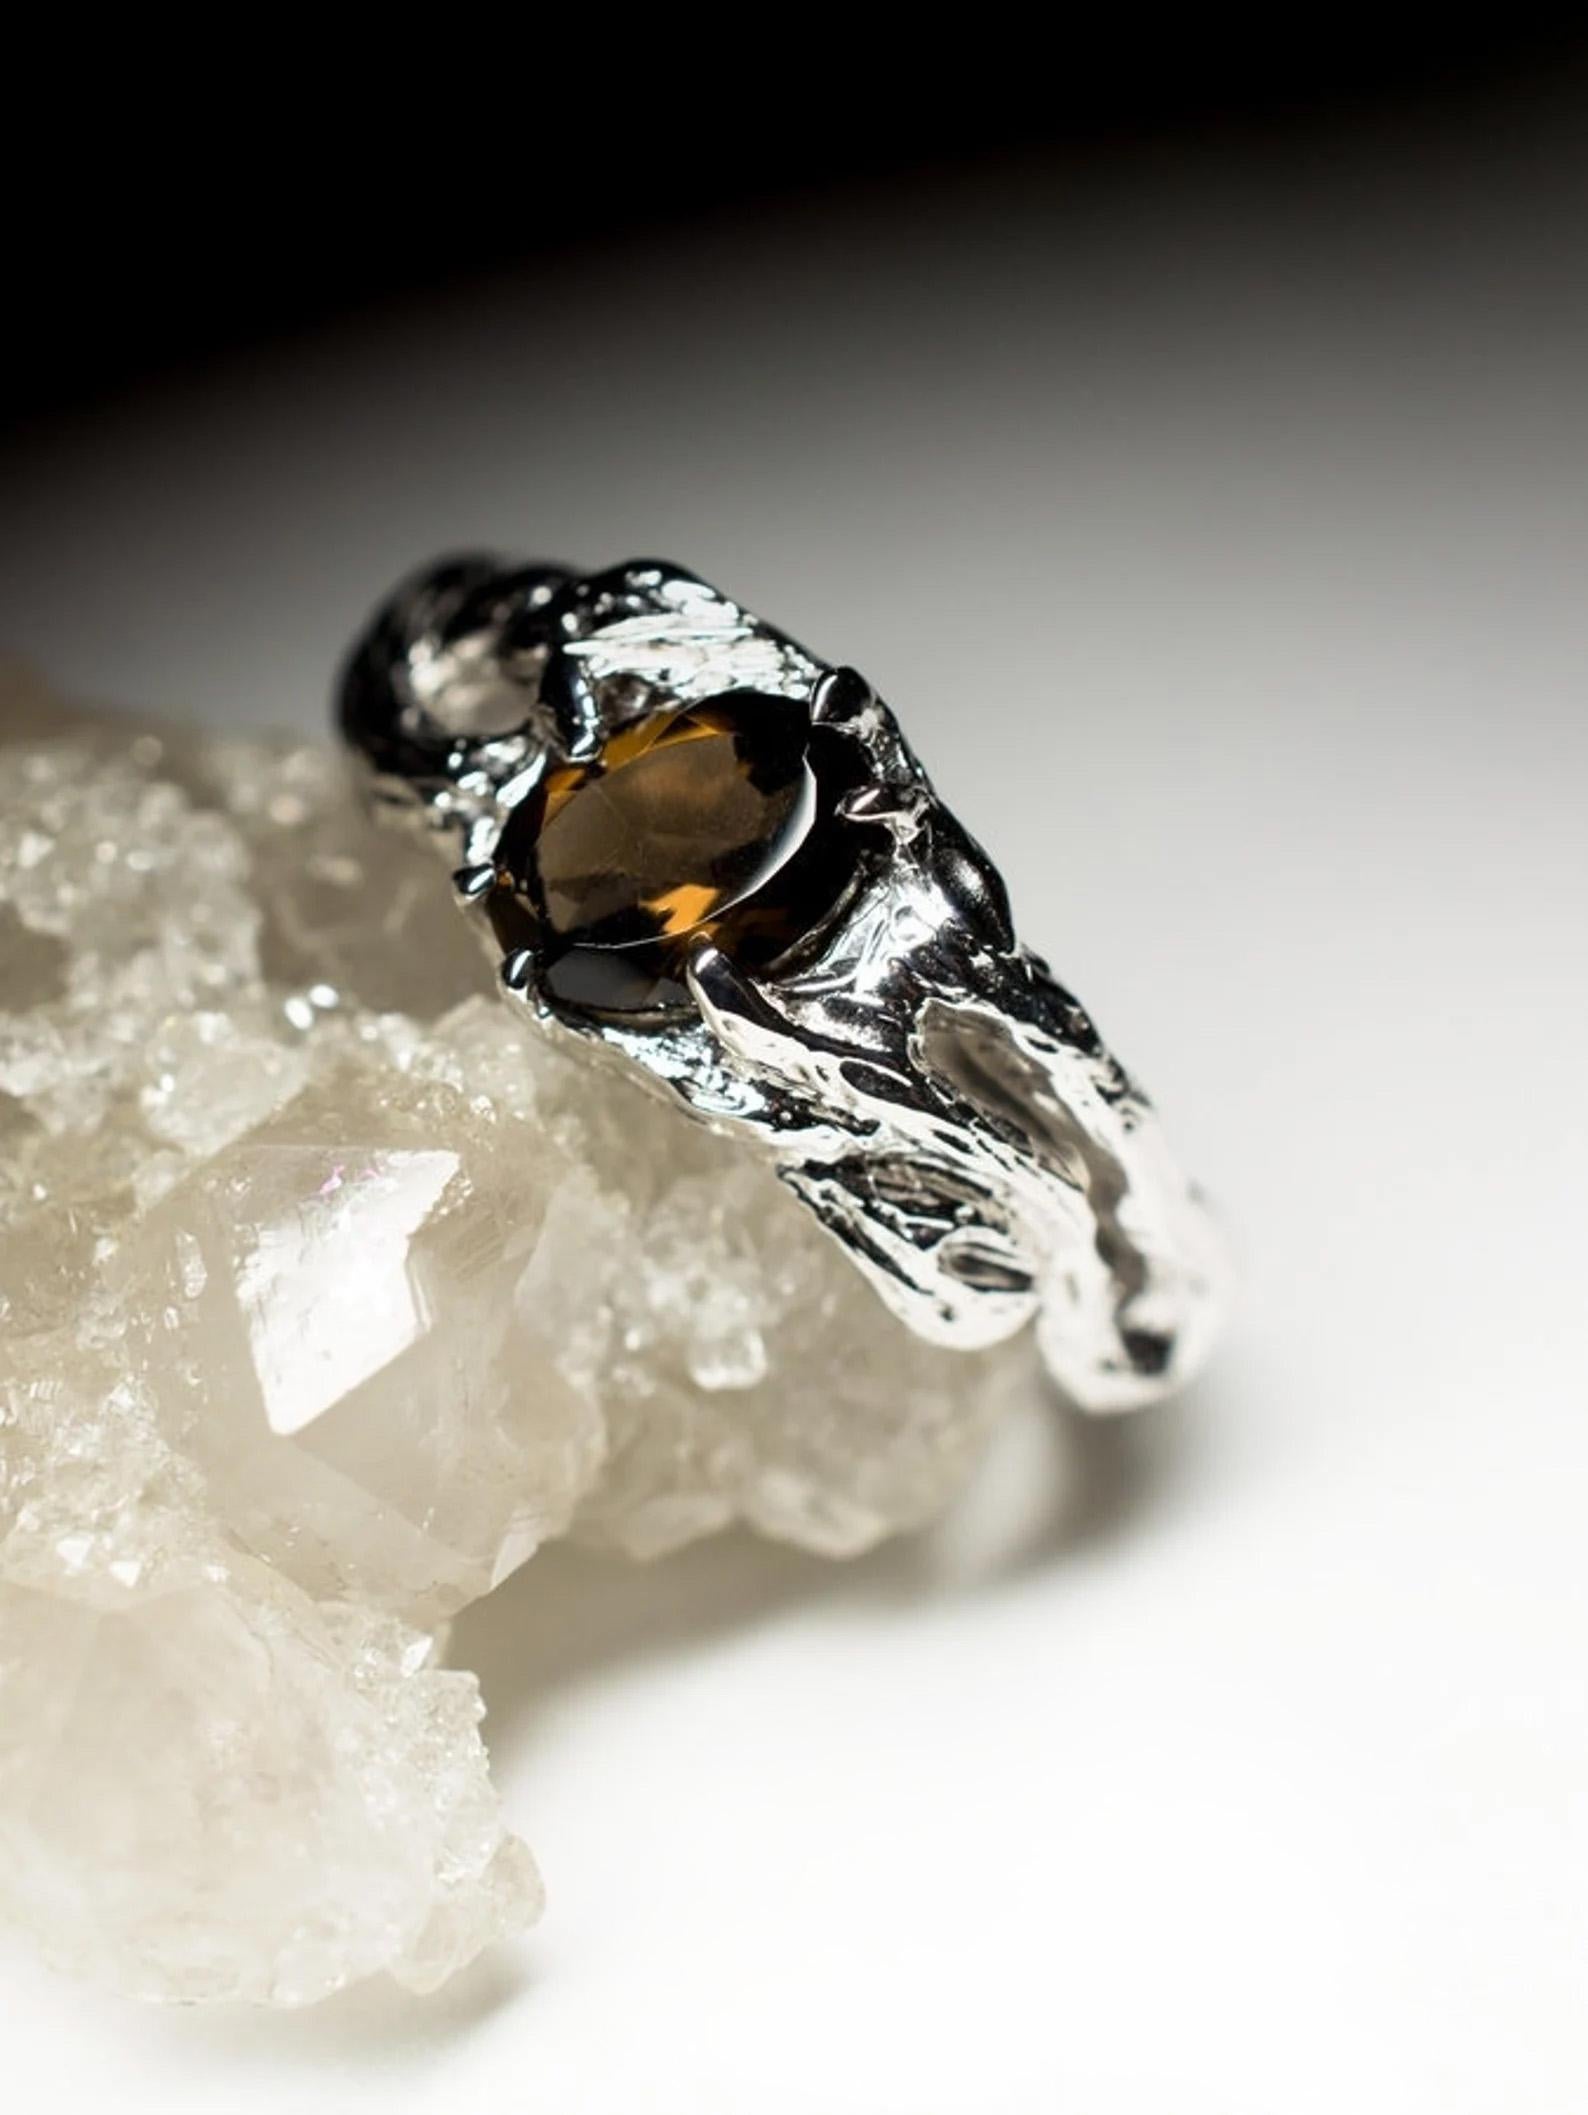 Silver ring with natural Smoky Quartz
quartz origin - Brazil
stone weight - 0.7 carats
average ring weight  - 2.96 grams
available ring sizes - 4; 4.5; 5.25; 5.75; 6.5; 7.25; 8; 8.5; 9 US
stone measurements - 0.12 x 0.2 x 0.28 in / 3 х 5 х 7 mm